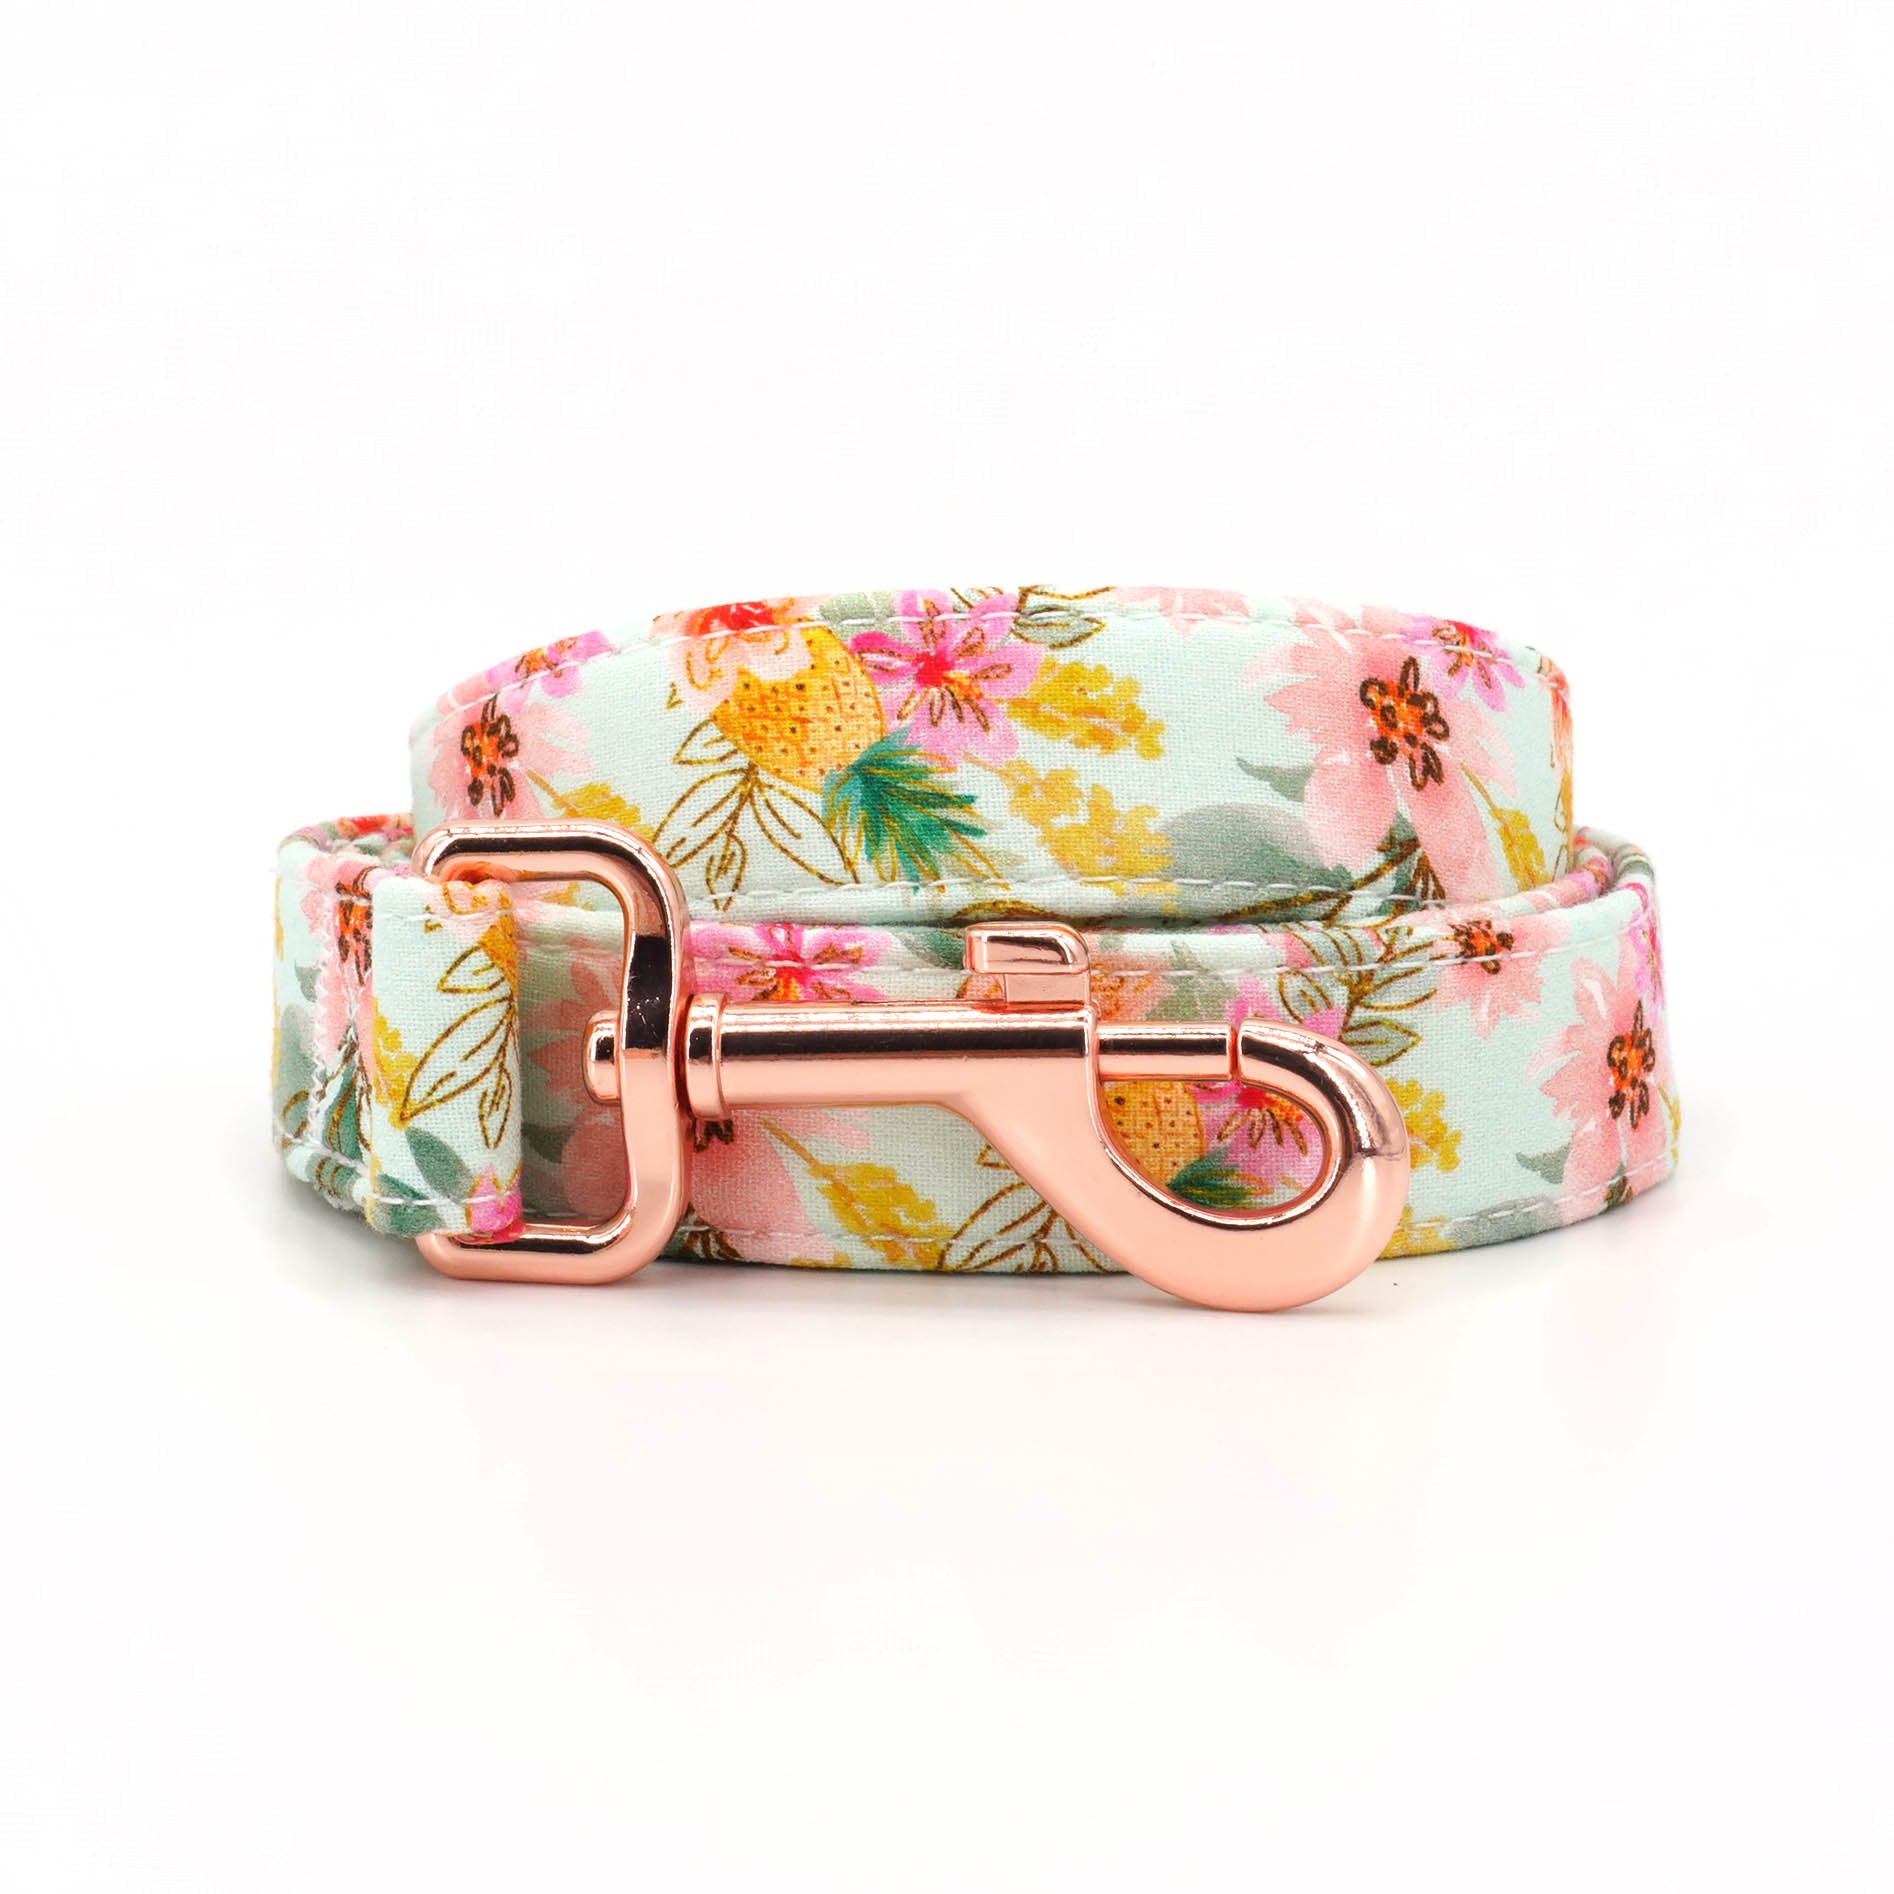 Flowers And Pineapple: Personalized Collars And Leash - CurliTail